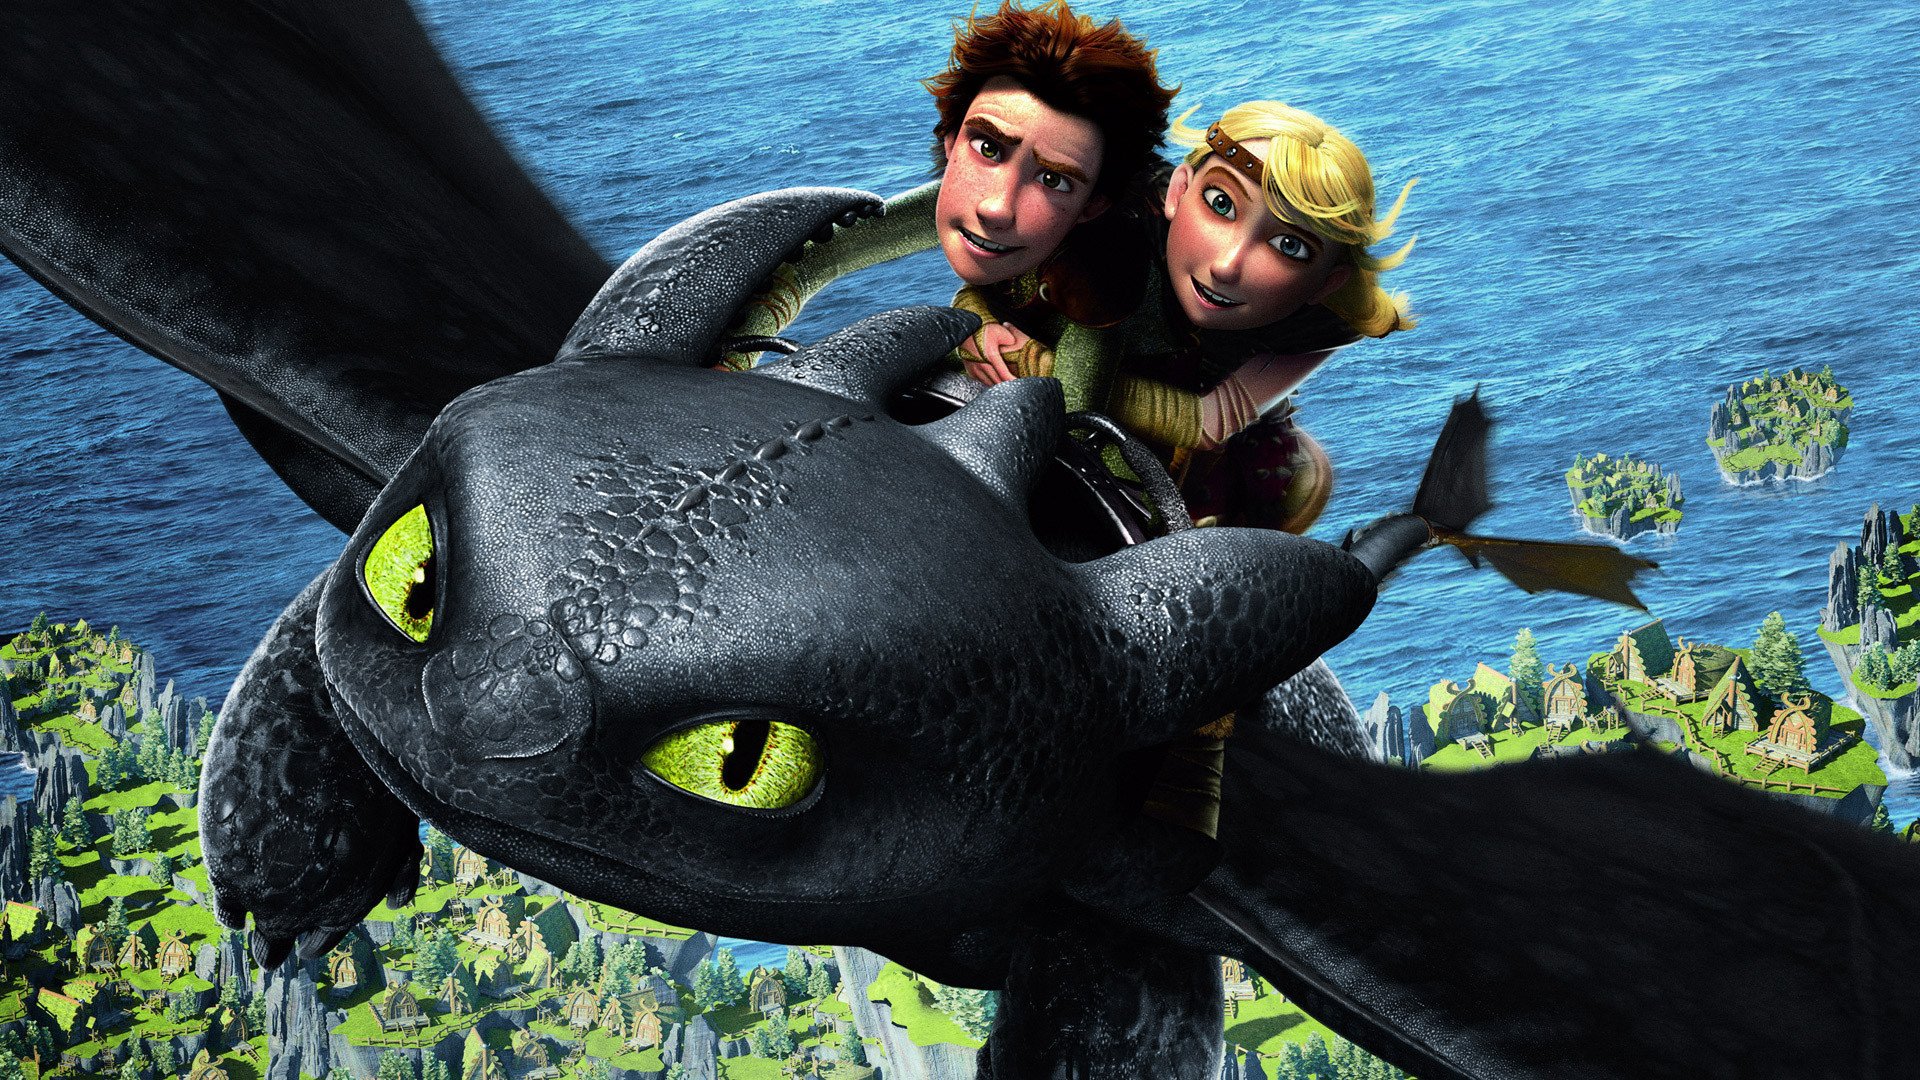 how to train your dragon hd wallpaper,photography,animation,recreation,vacation,fish